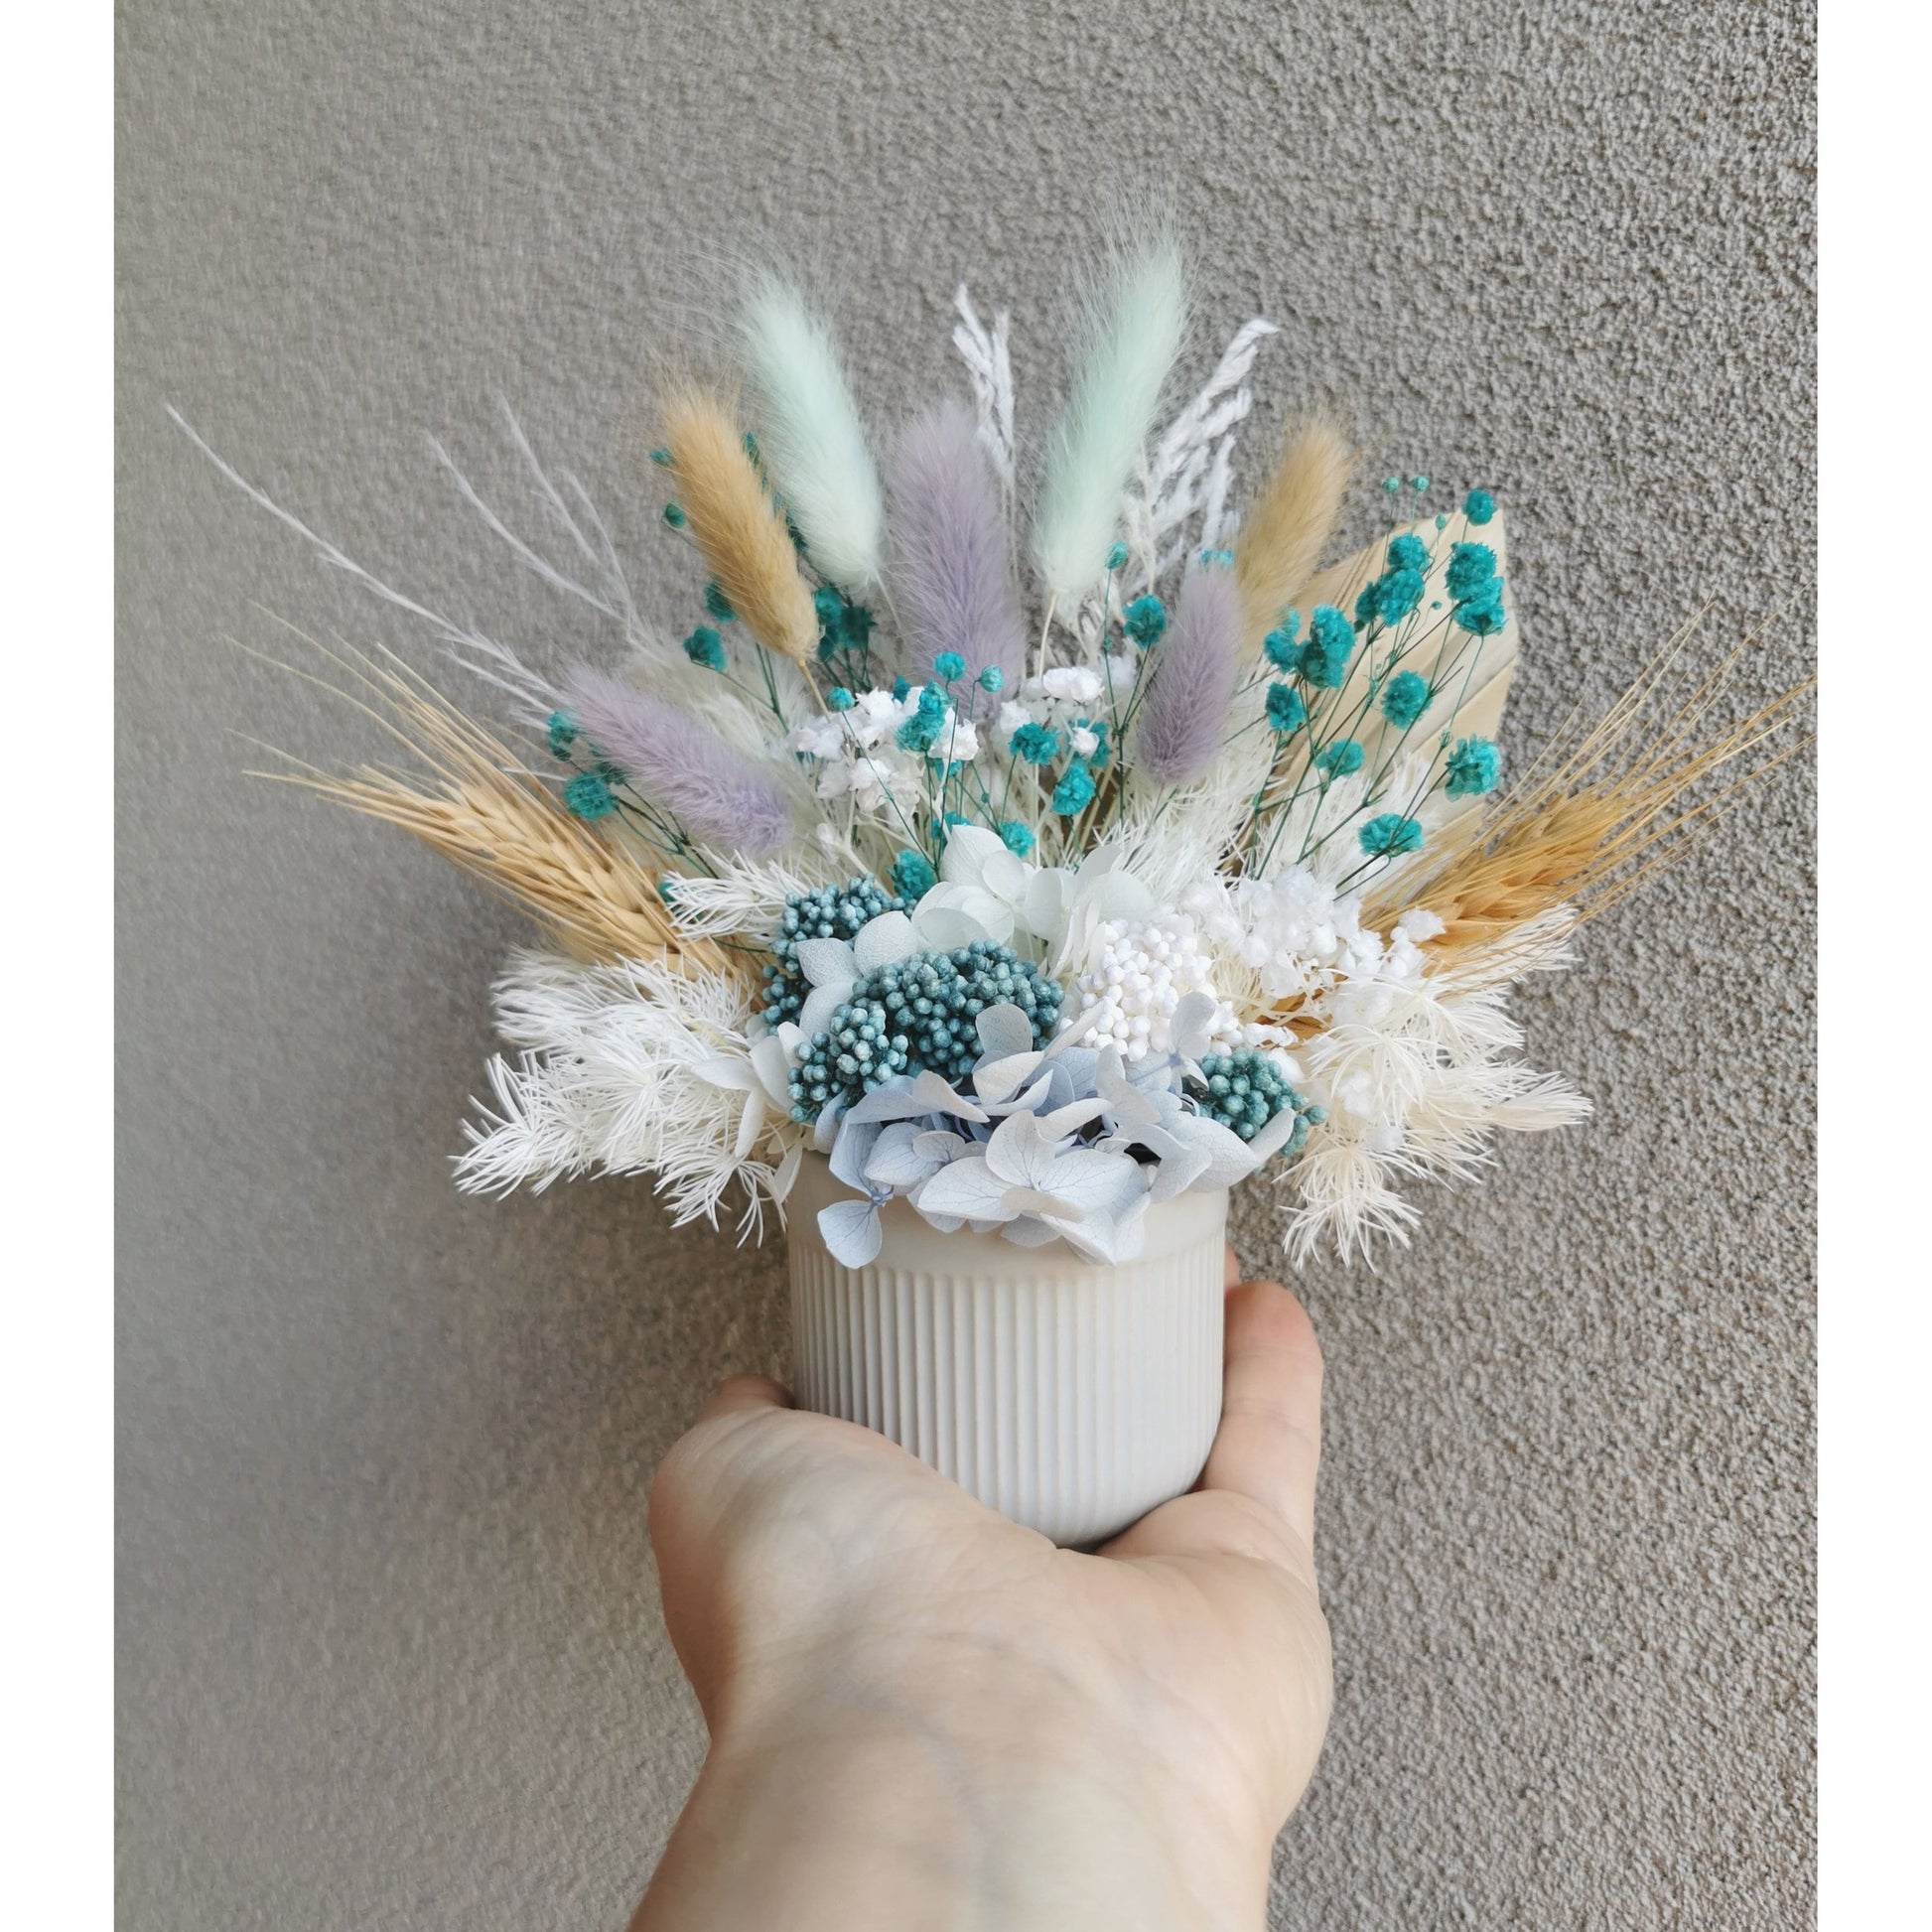 Natural, white, blue & purple dried & preserved mini flower arrangement in ribbed pot. Photo shows arrangement being held by hand against a blank wall